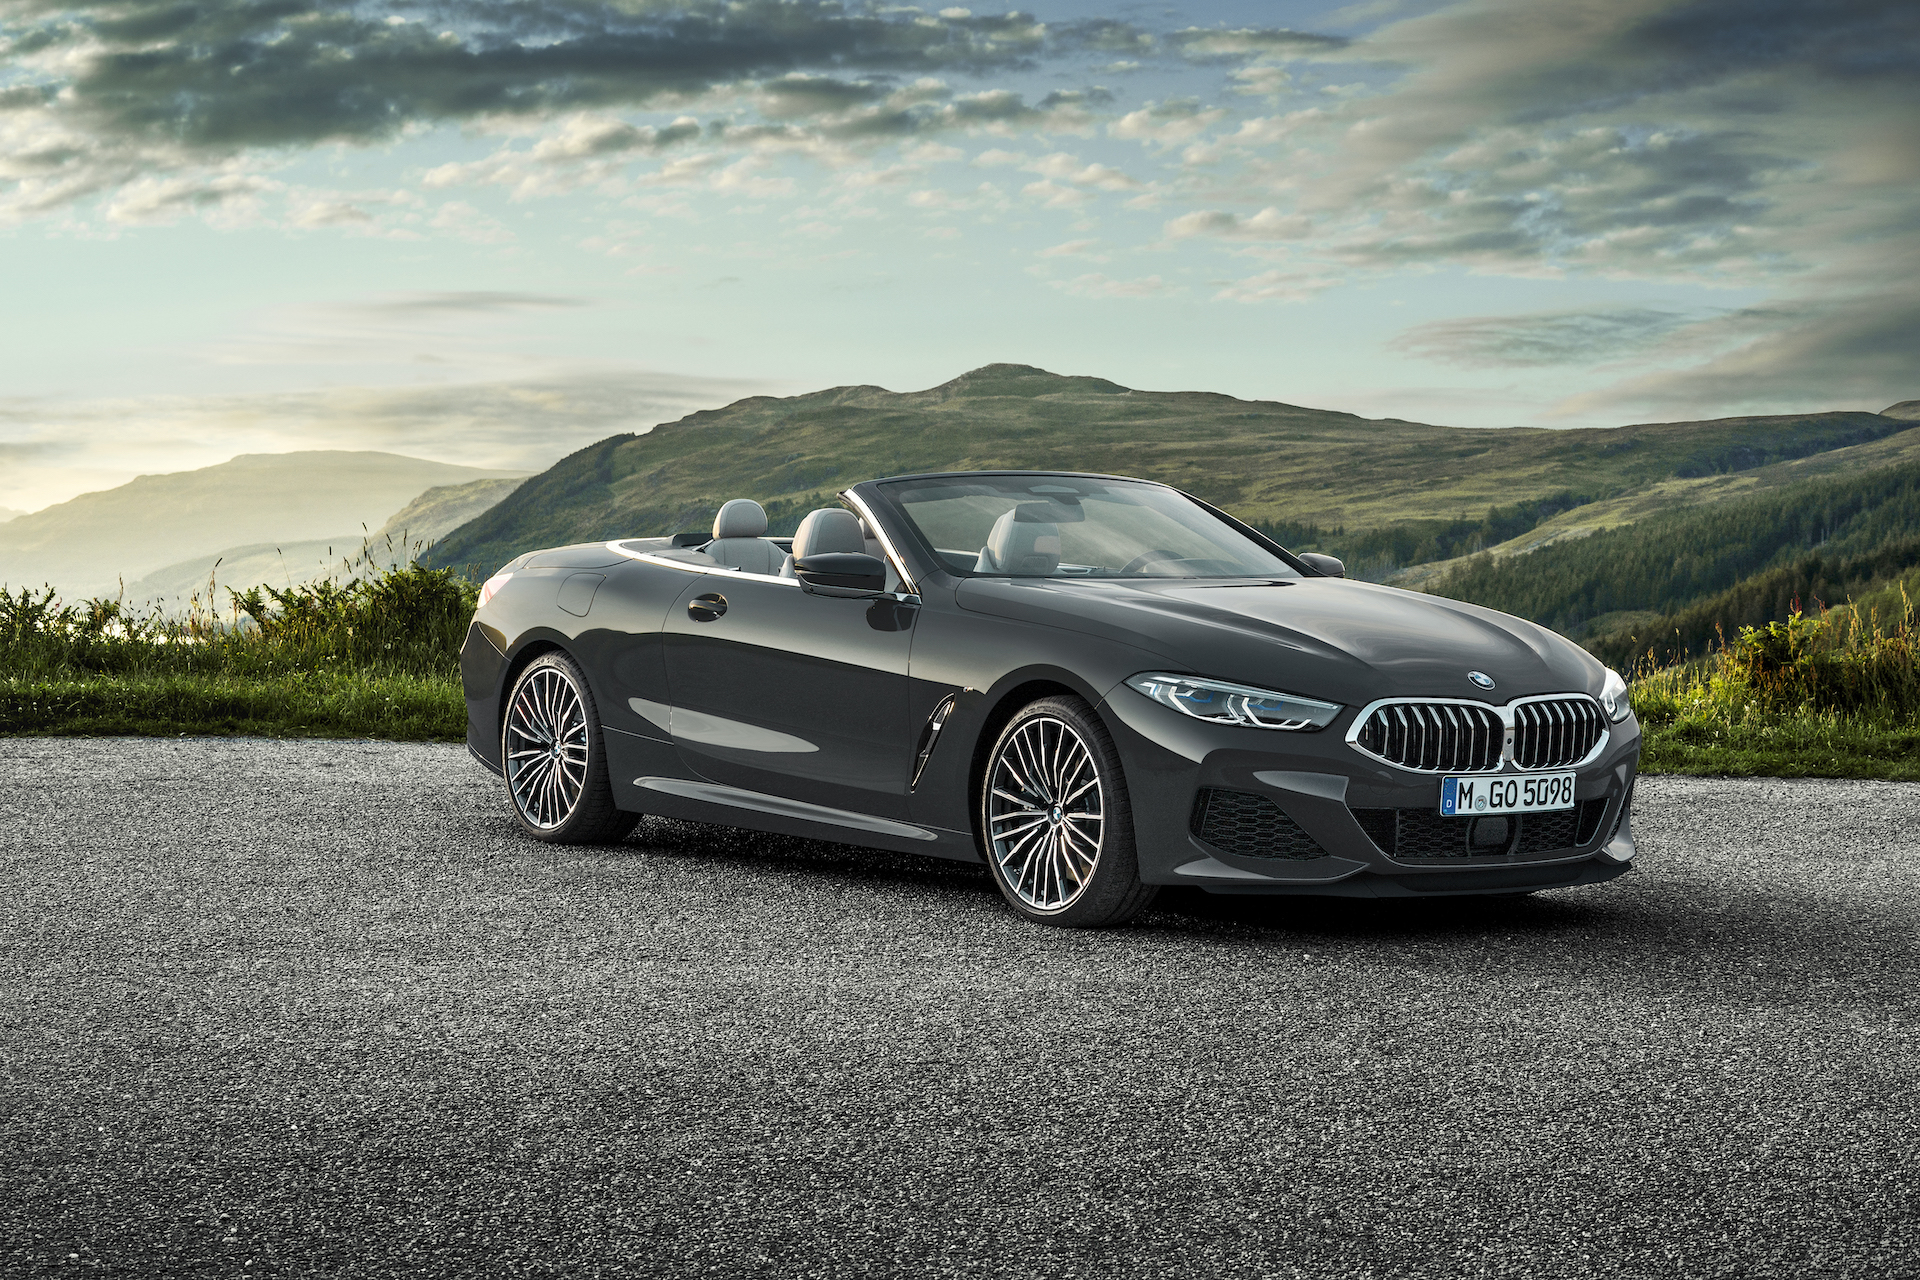 First drive review: 2019 BMW M850i xDrive convertible goes big on